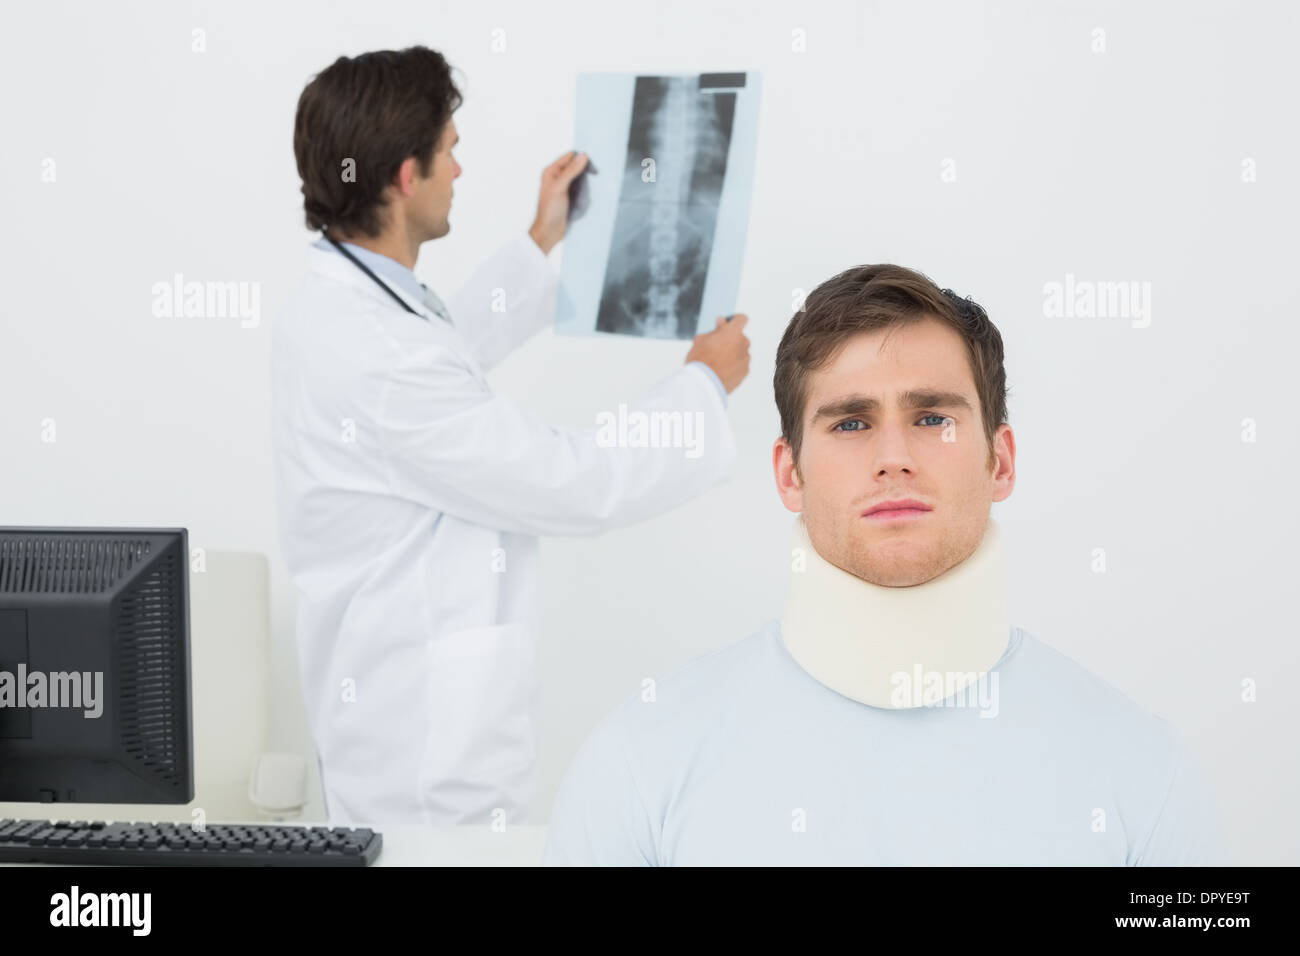 Patient in surgical collar with doctor examining spine x-ray behind Stock Photo